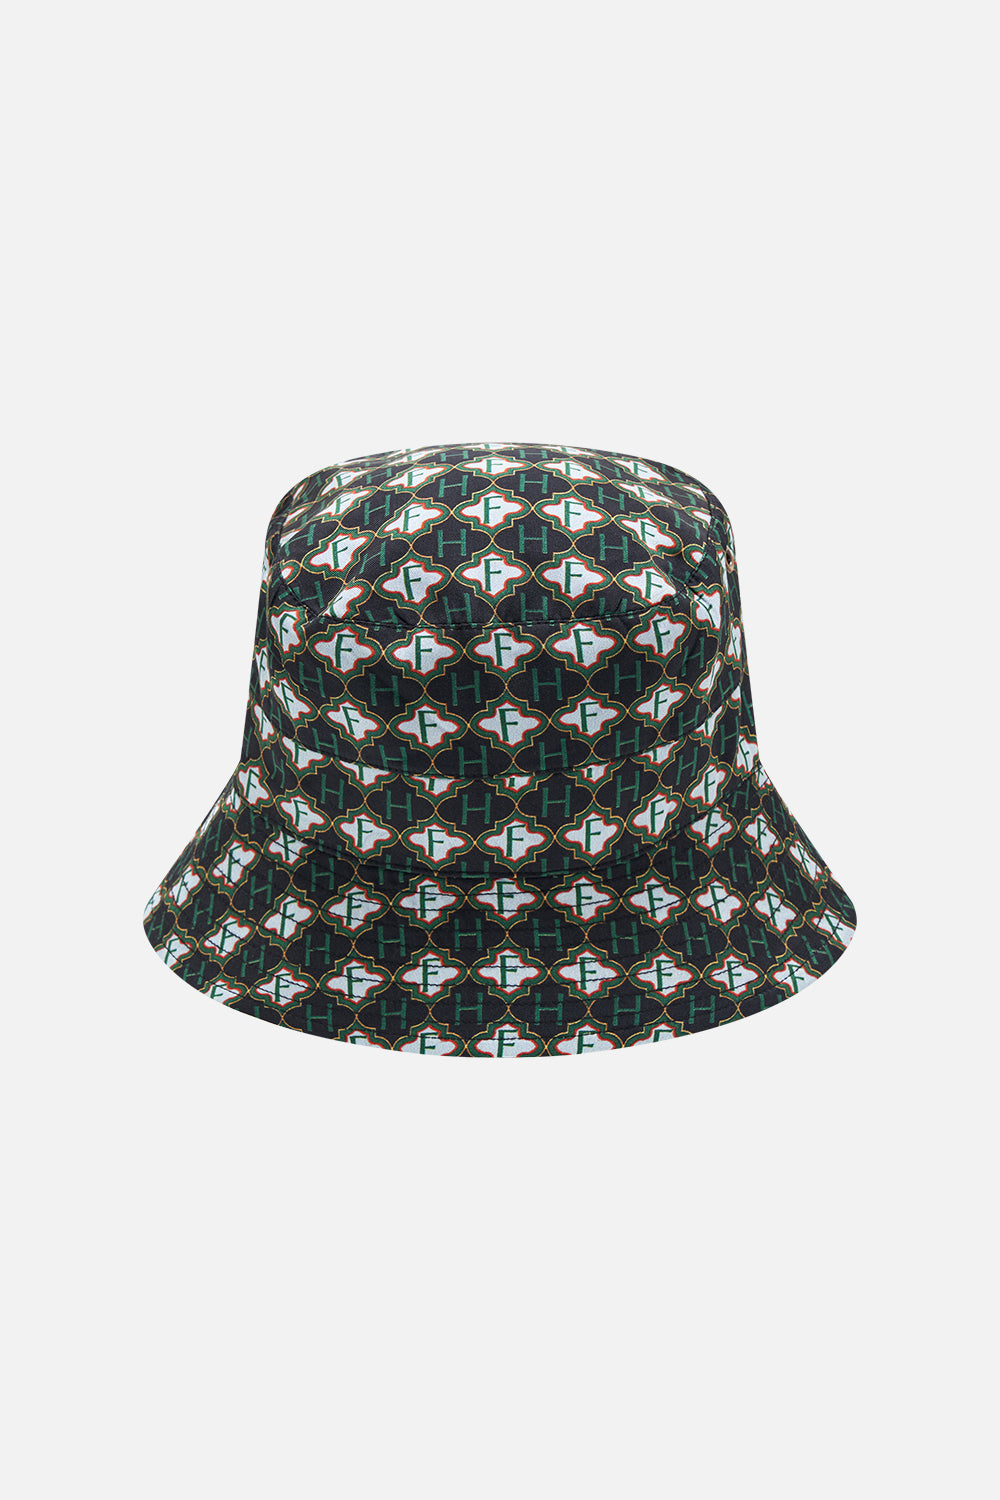 Reversible detail back view of Hotel Franks By CAMILLA mens reversible bucket hat in Jealousy And Jewels print